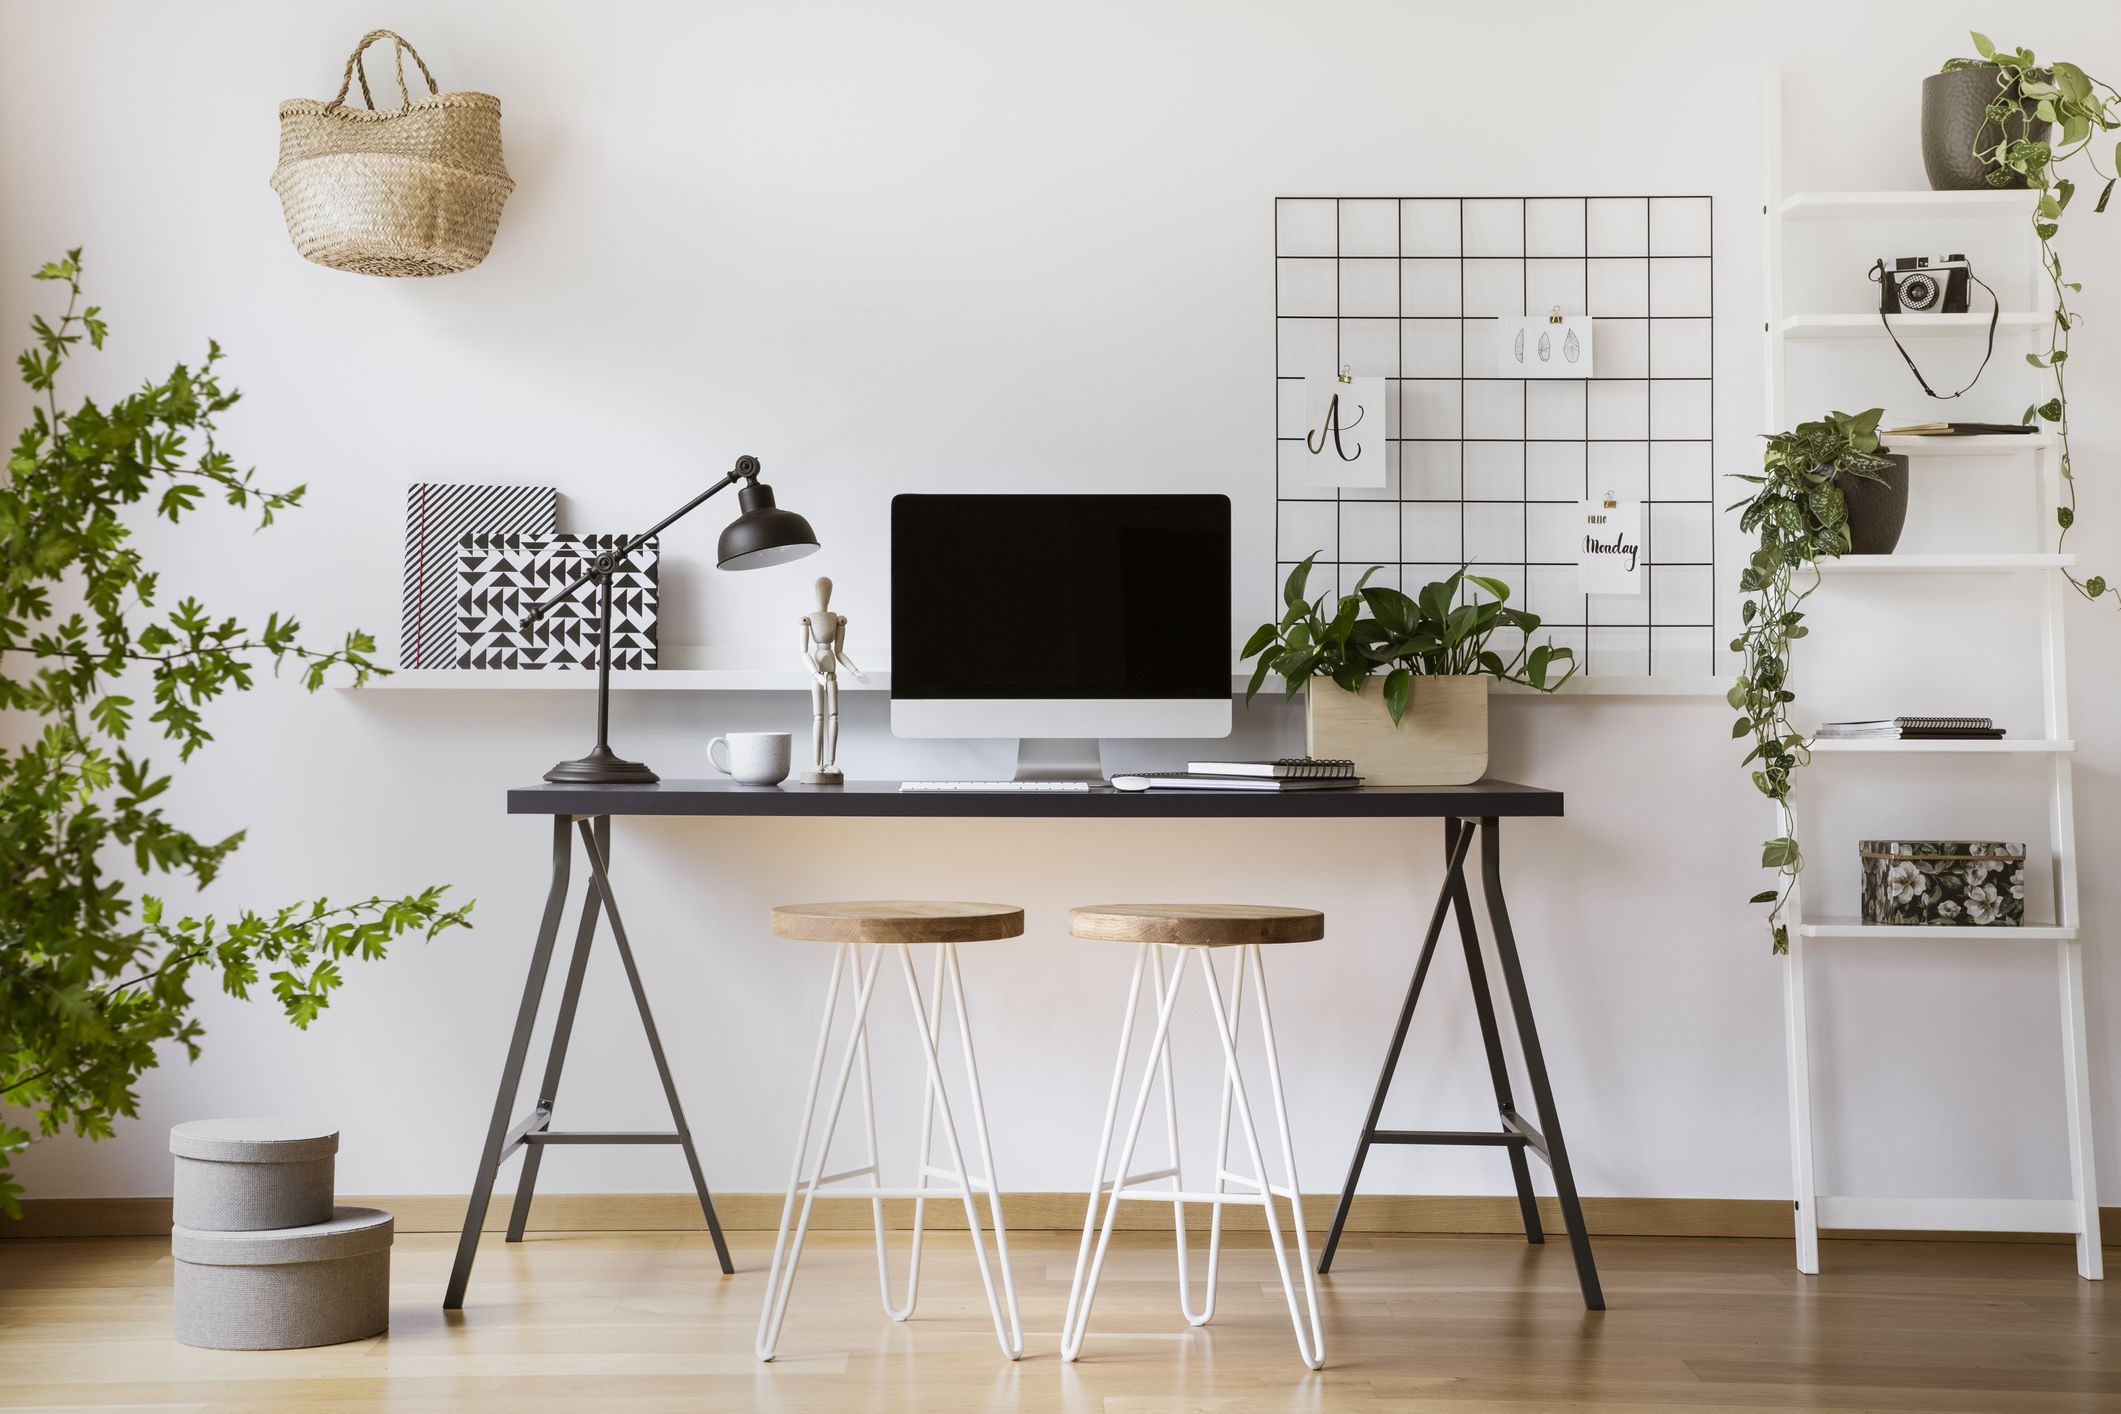 21 Diy Home Office Decor Ideas Best, How To Decorate A Small Desk At Work